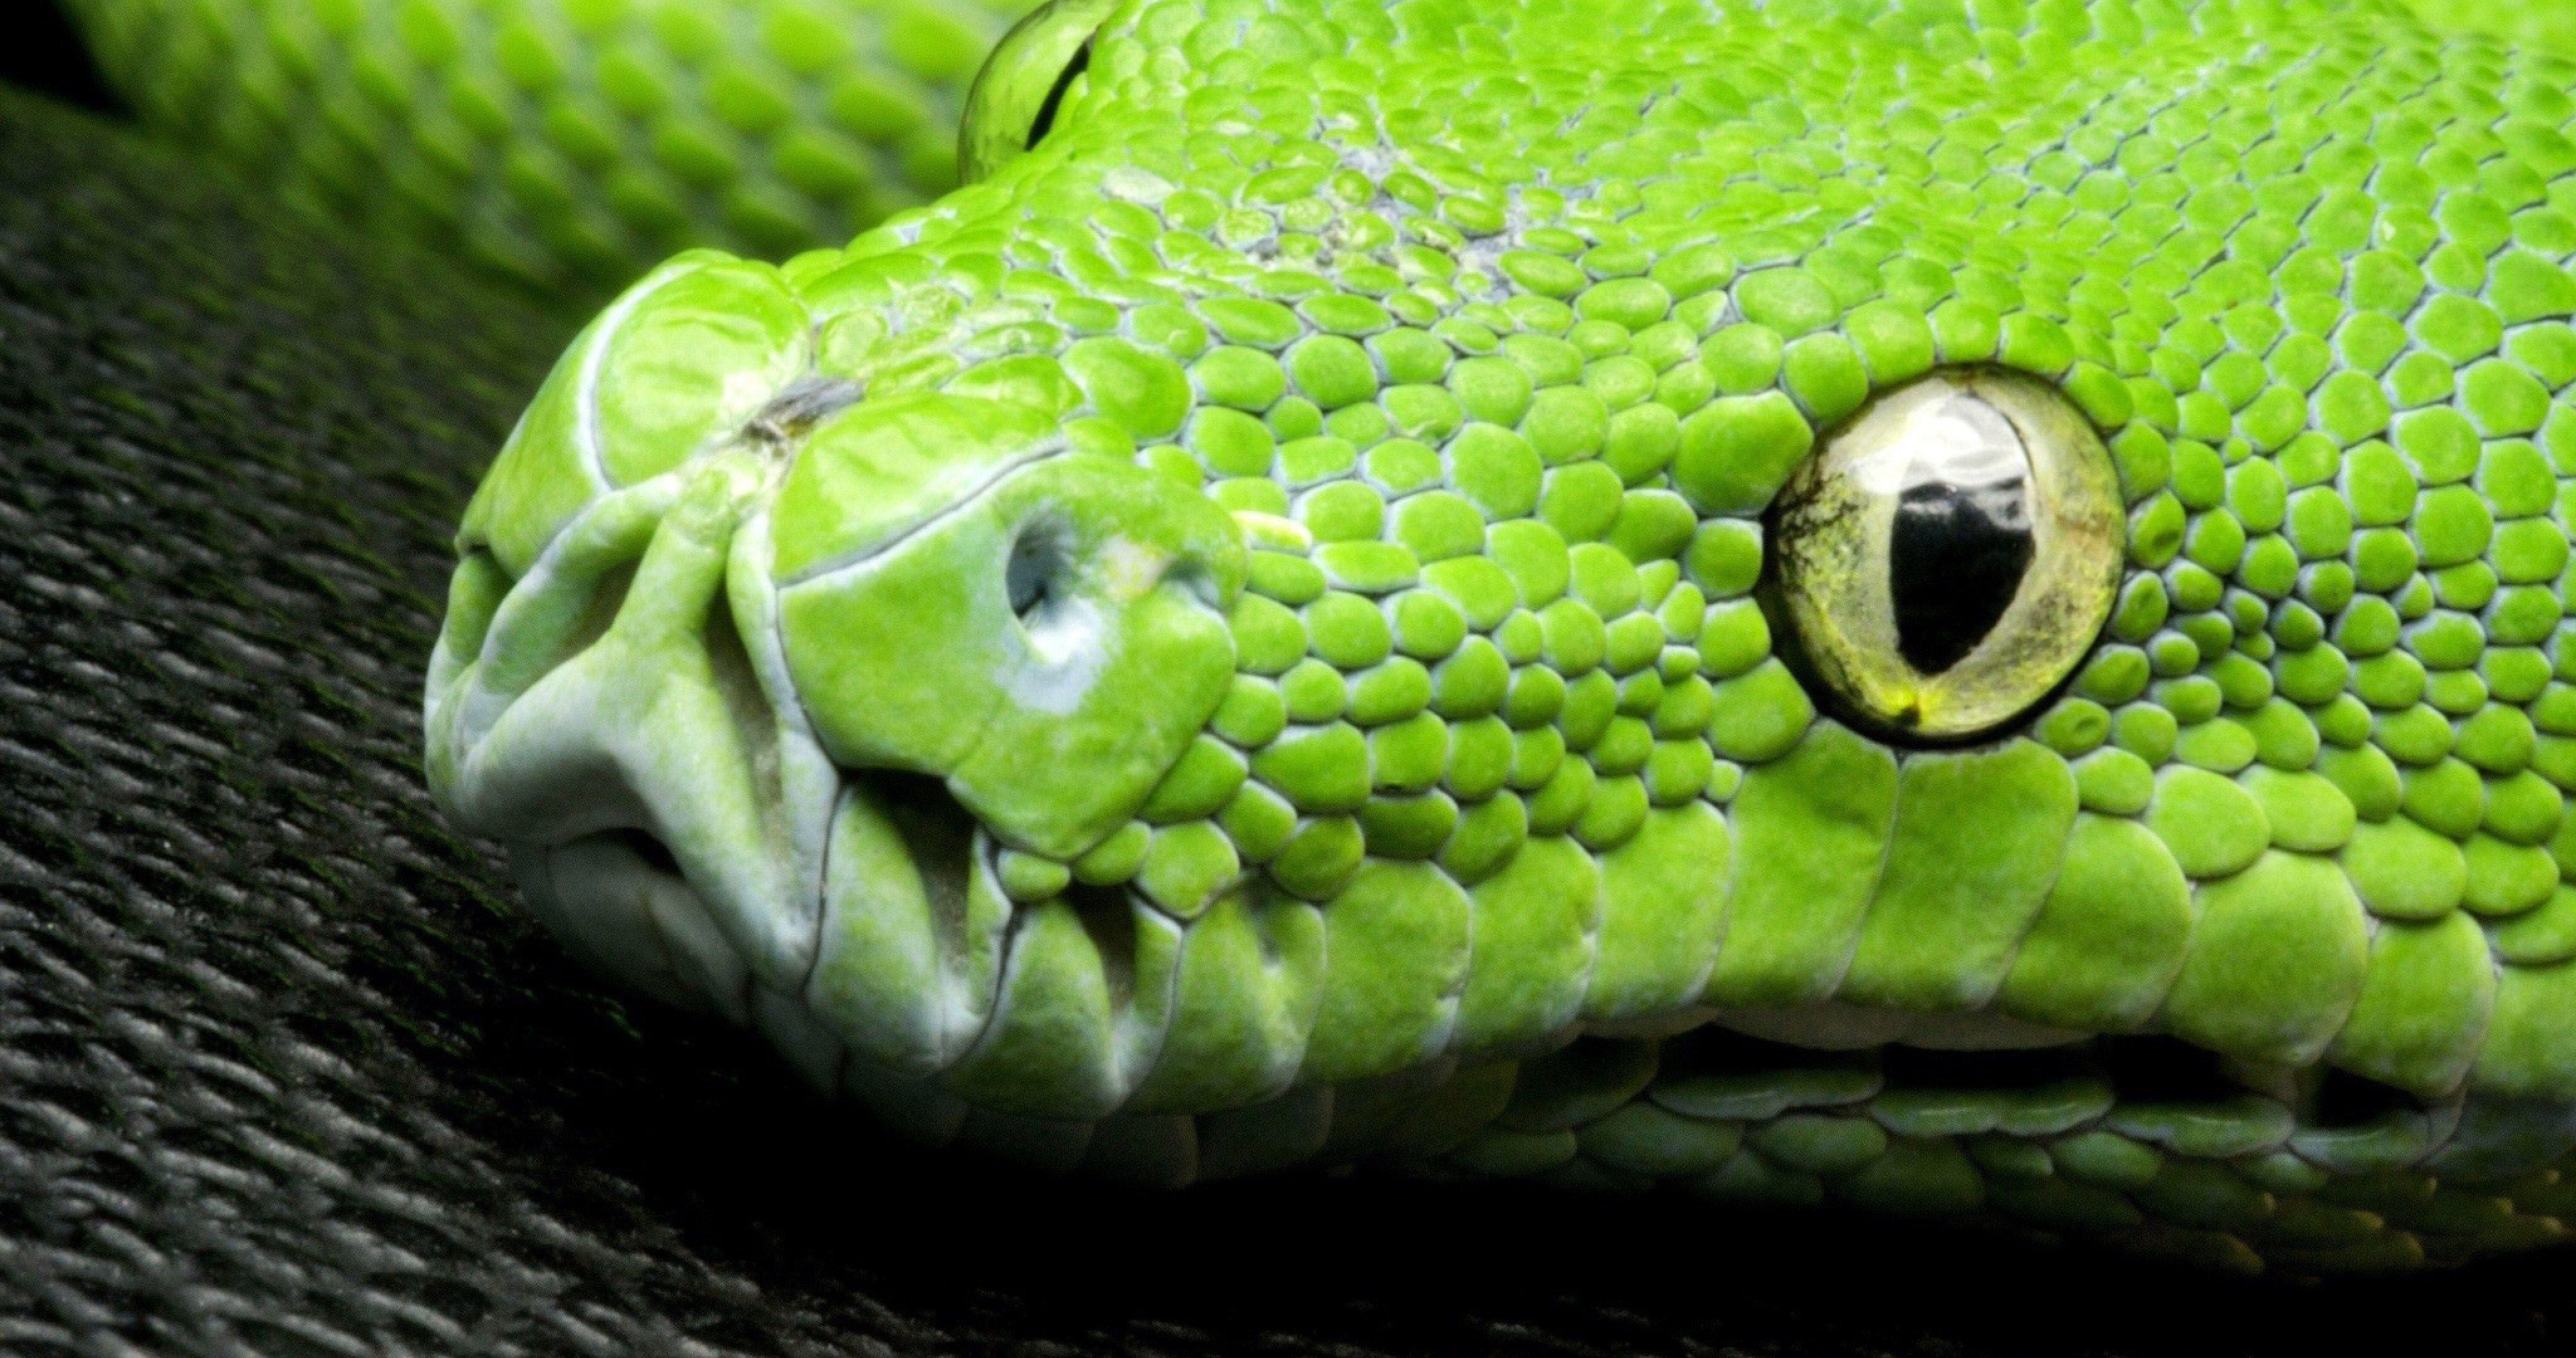 Ultra HD Snakes Wallpaper Free Ultra HD Snakes Background